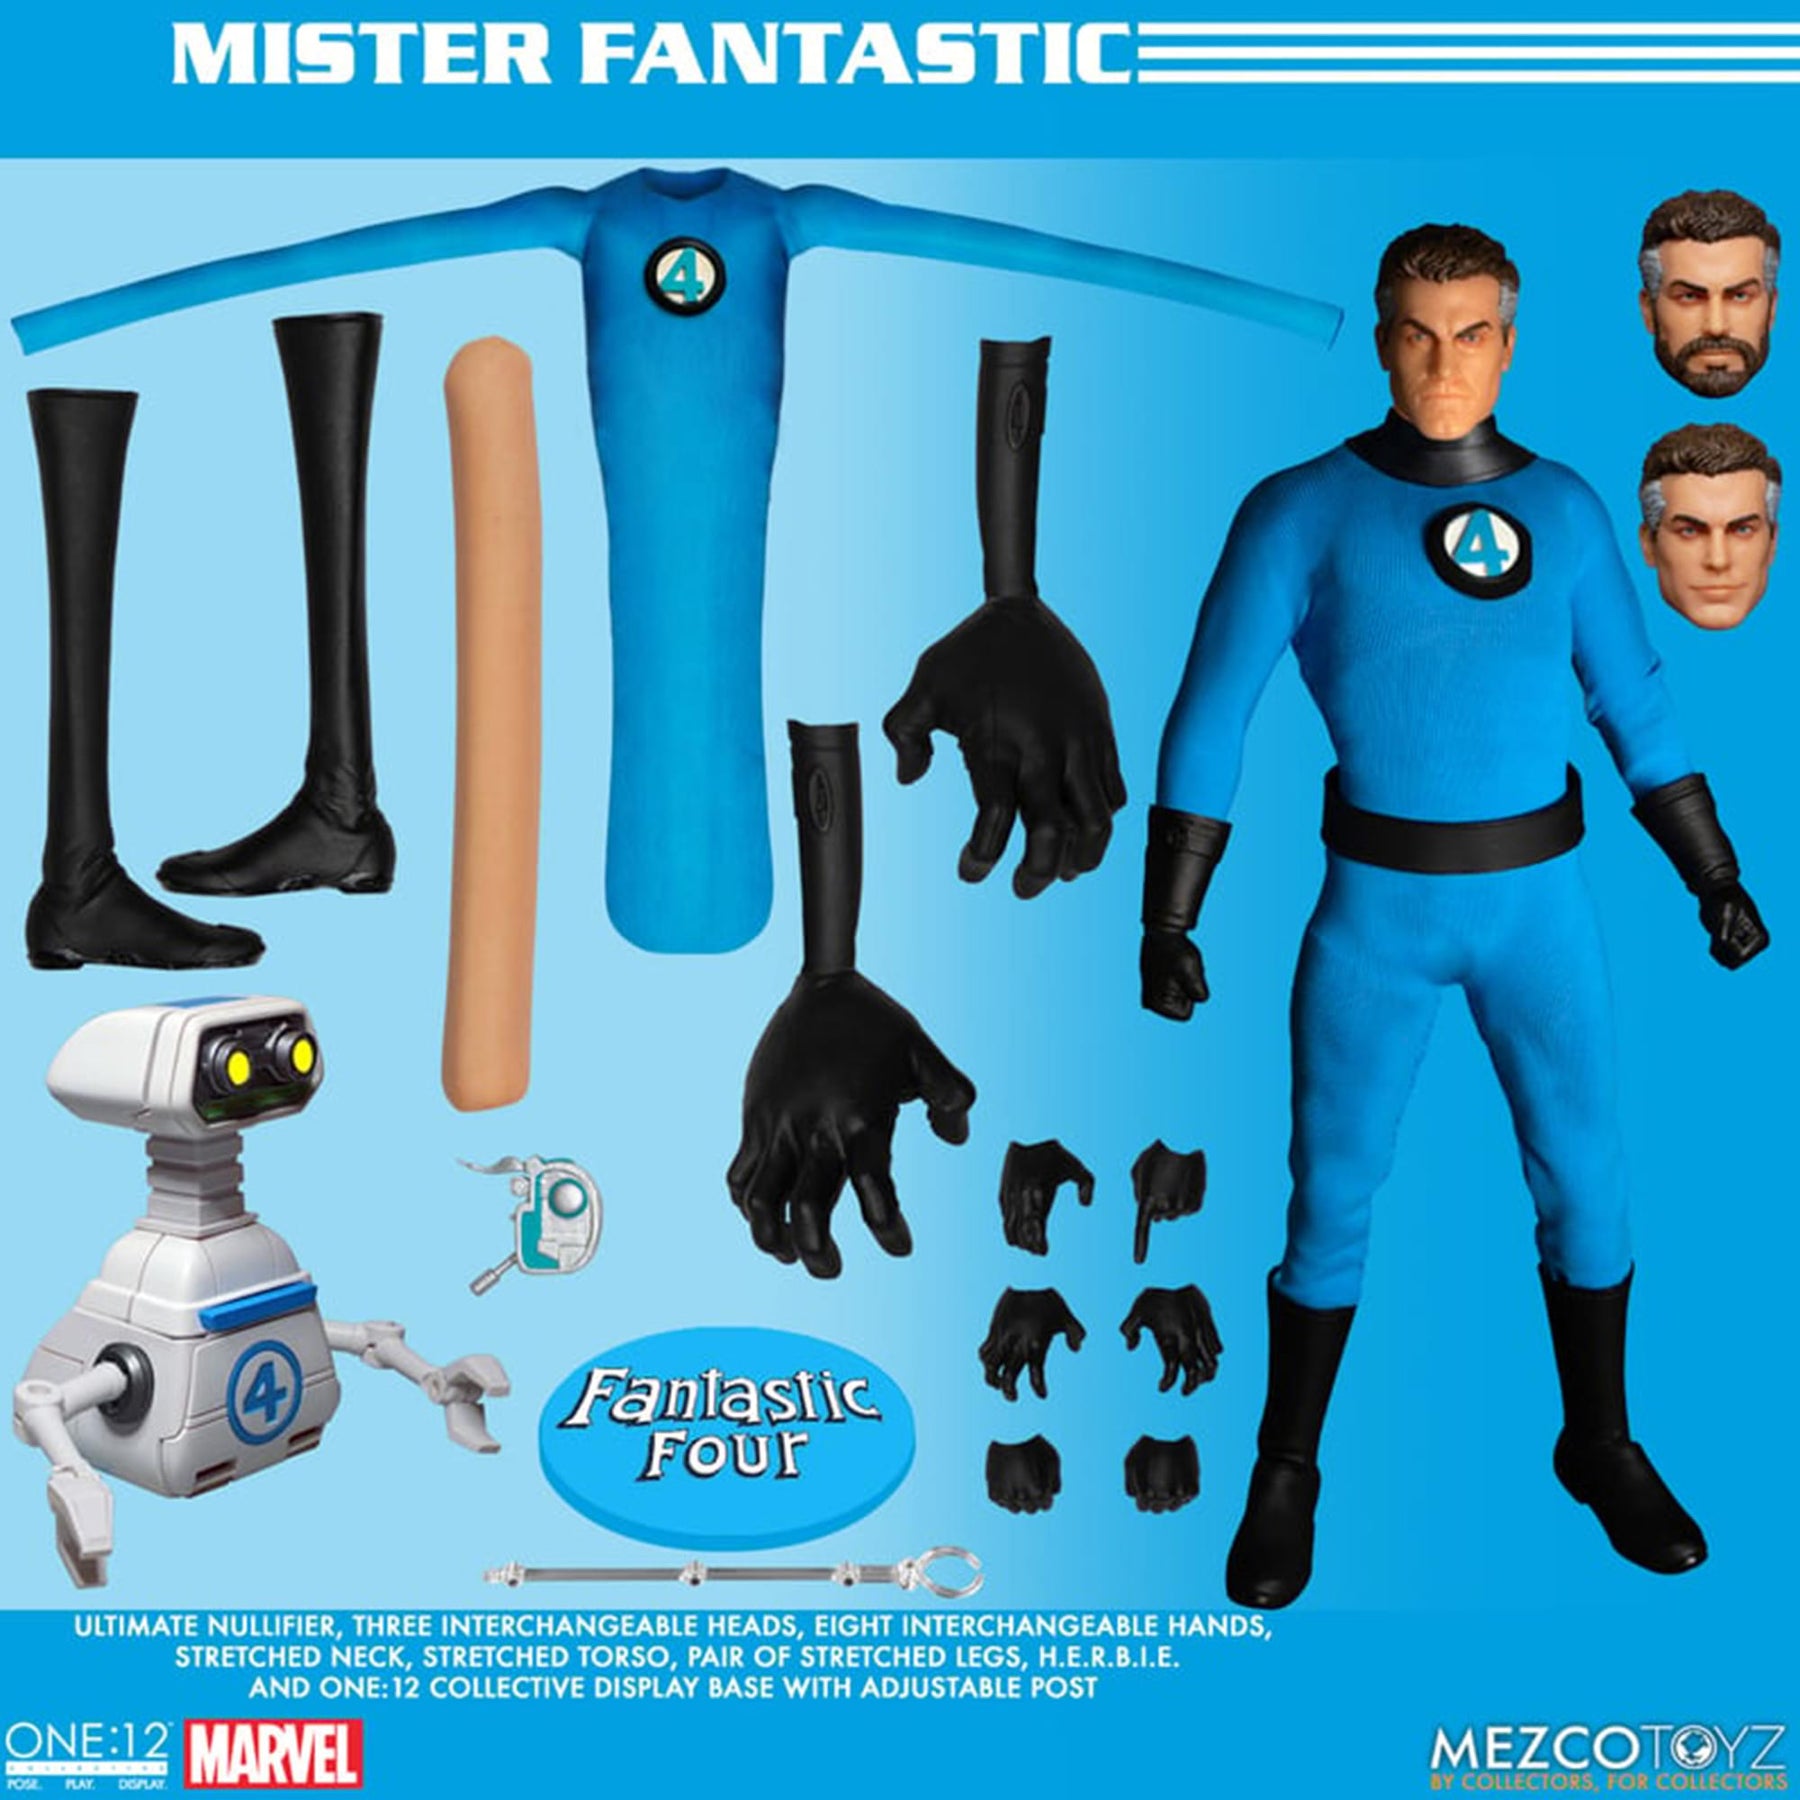 Marvel Fantastic Four Deluxe One:12 Collective Steel Boxed Set